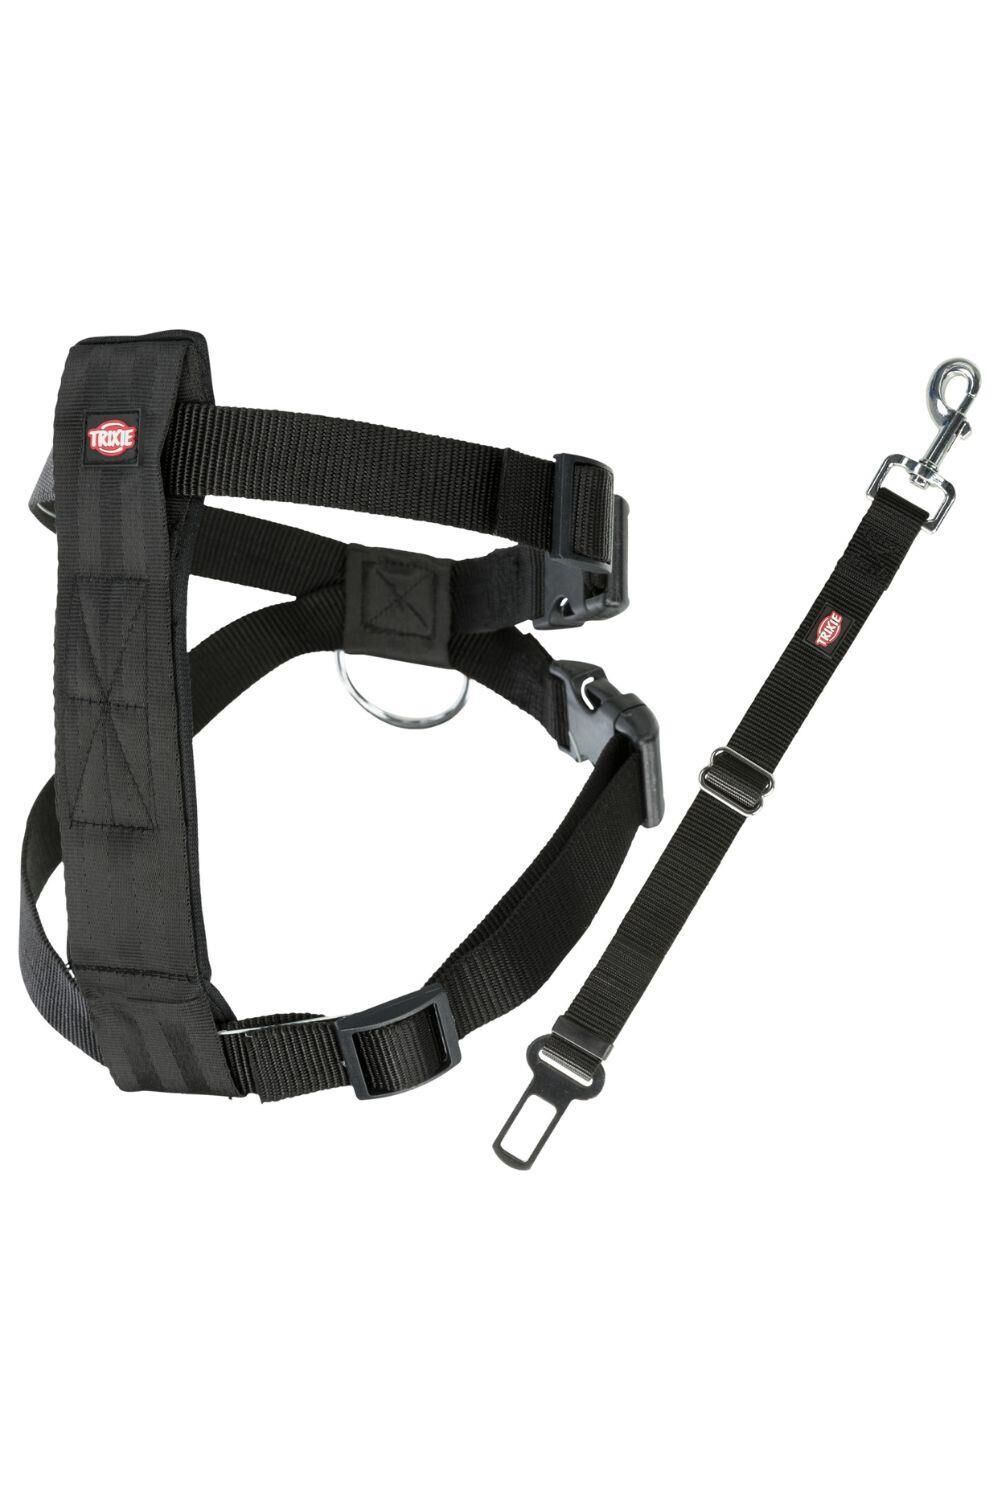 TRIXIE Trixie Dog Car Harness with Adjustable Safety Belt